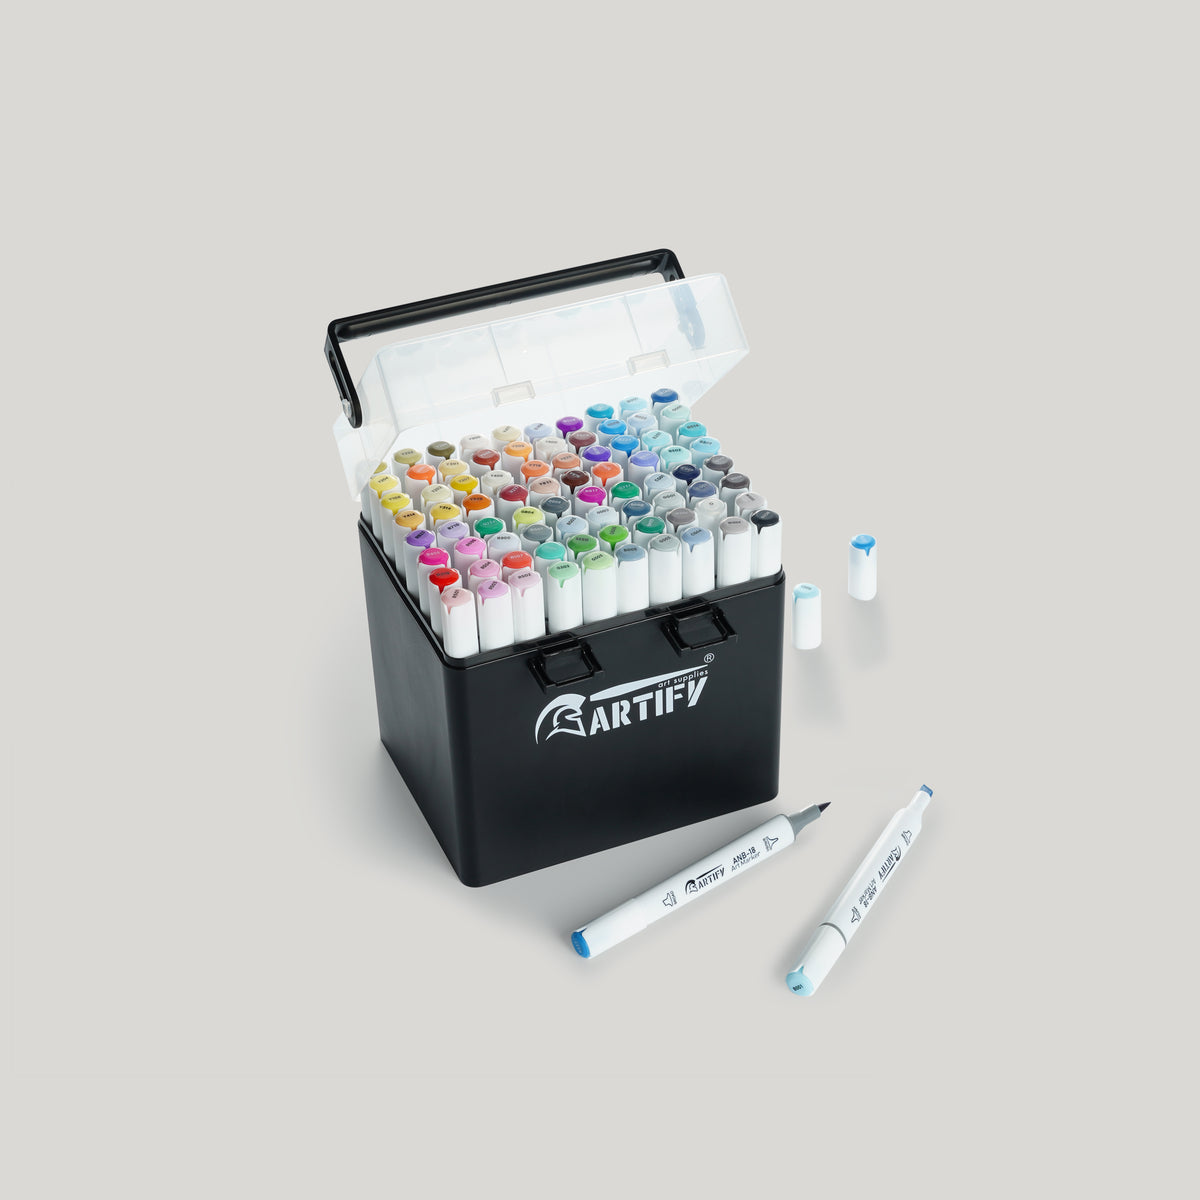 ARTIFY 80 Colors Art Markers-Fine & Broad Dual Tips Professional Artis –  Artify